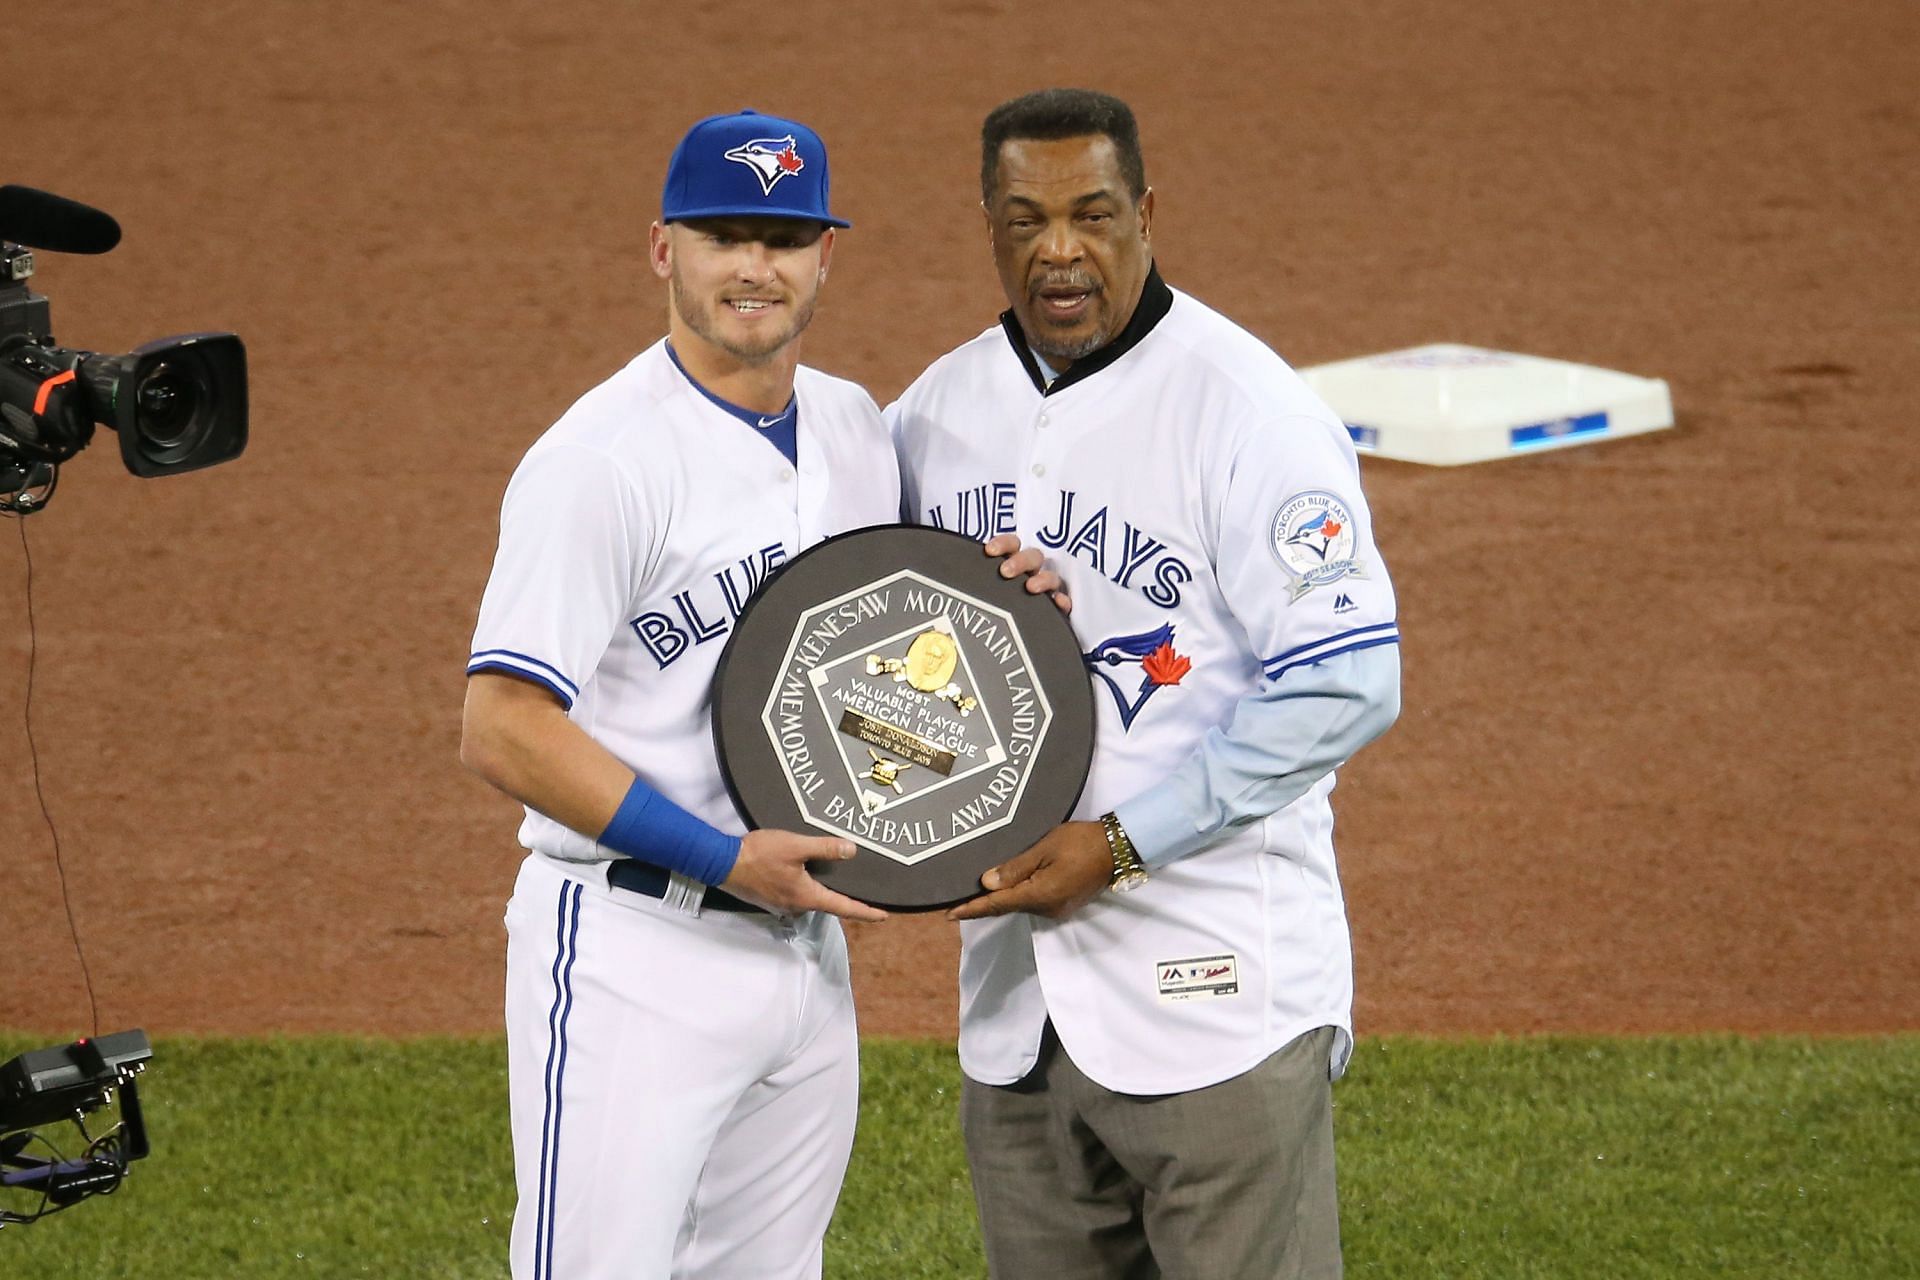 Josh Donaldson is presented with the 2015 AL MVP Award by former Blue Jays player George Bell.